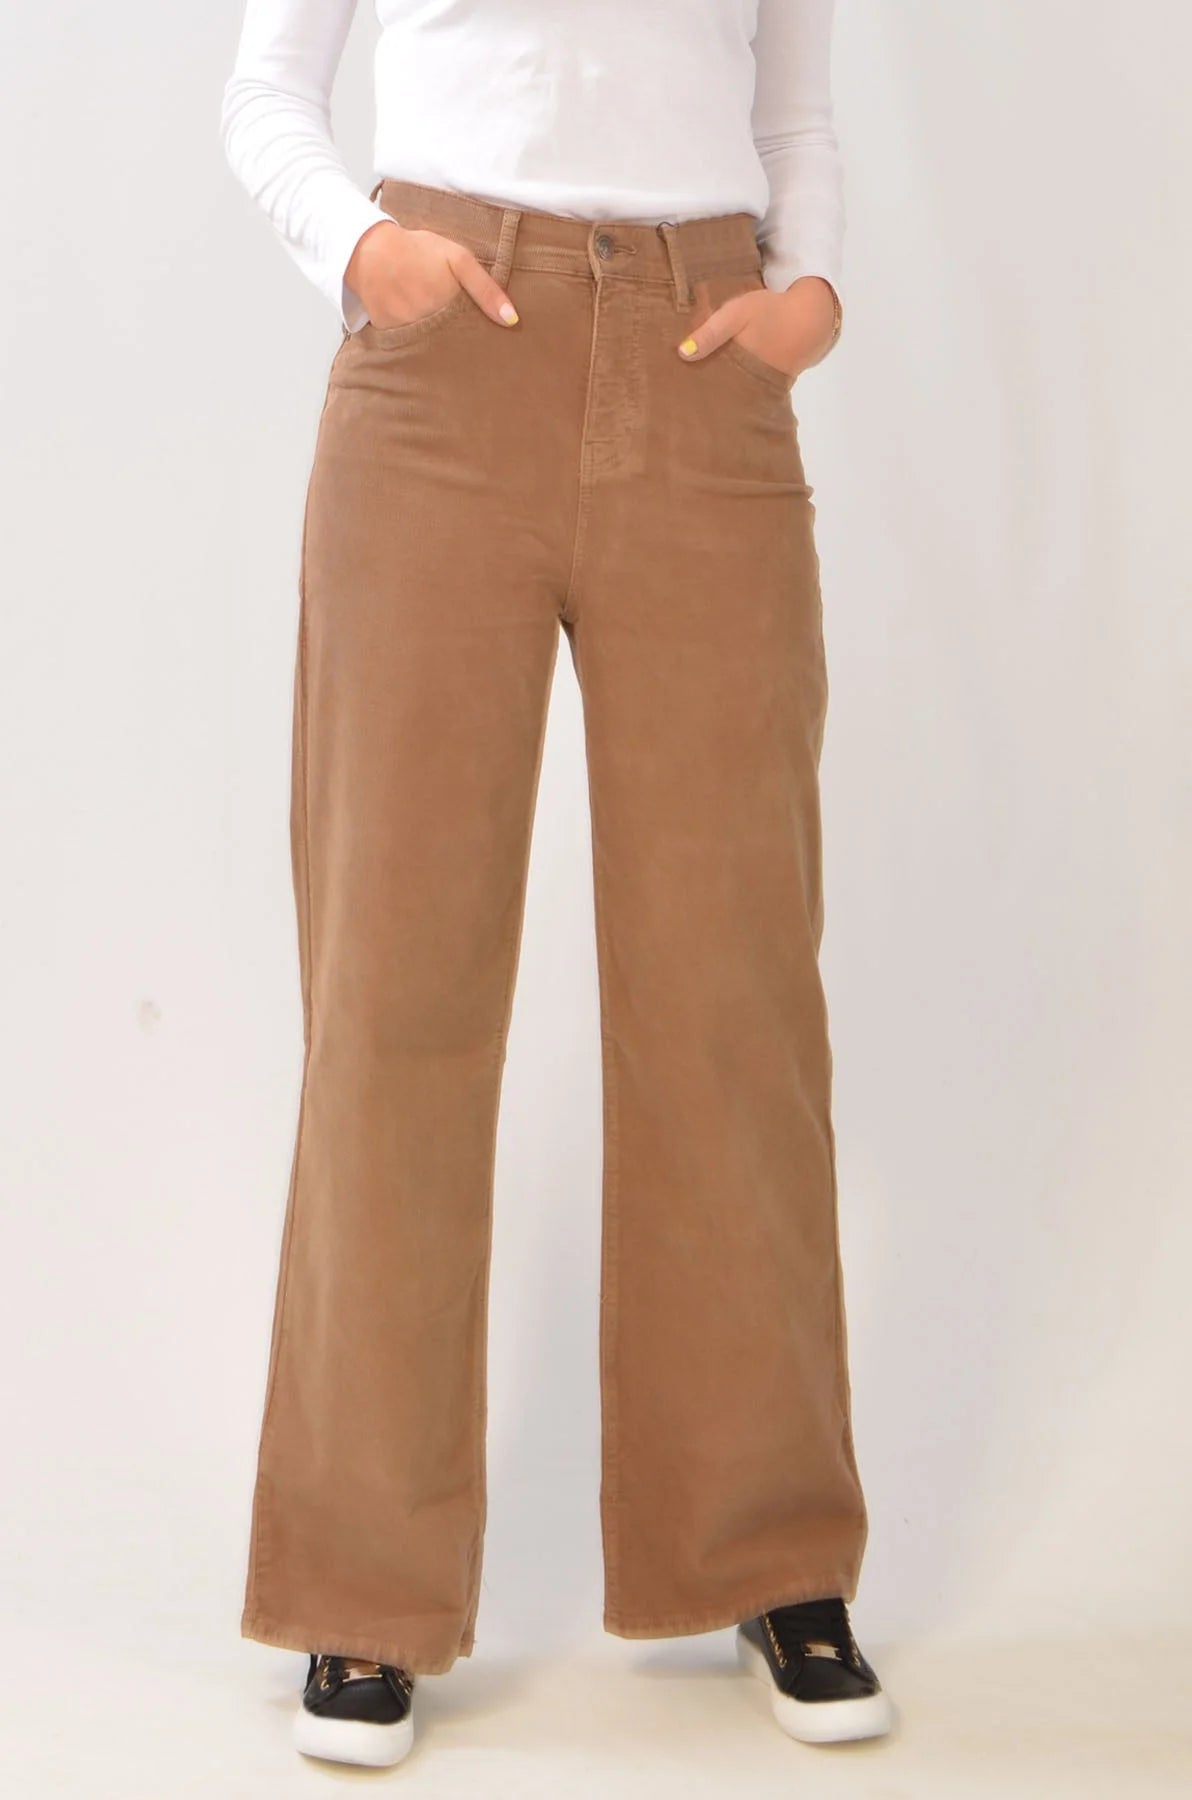 M&S Autograph High Waisted Flare Corduroy Trousers Tan / 8